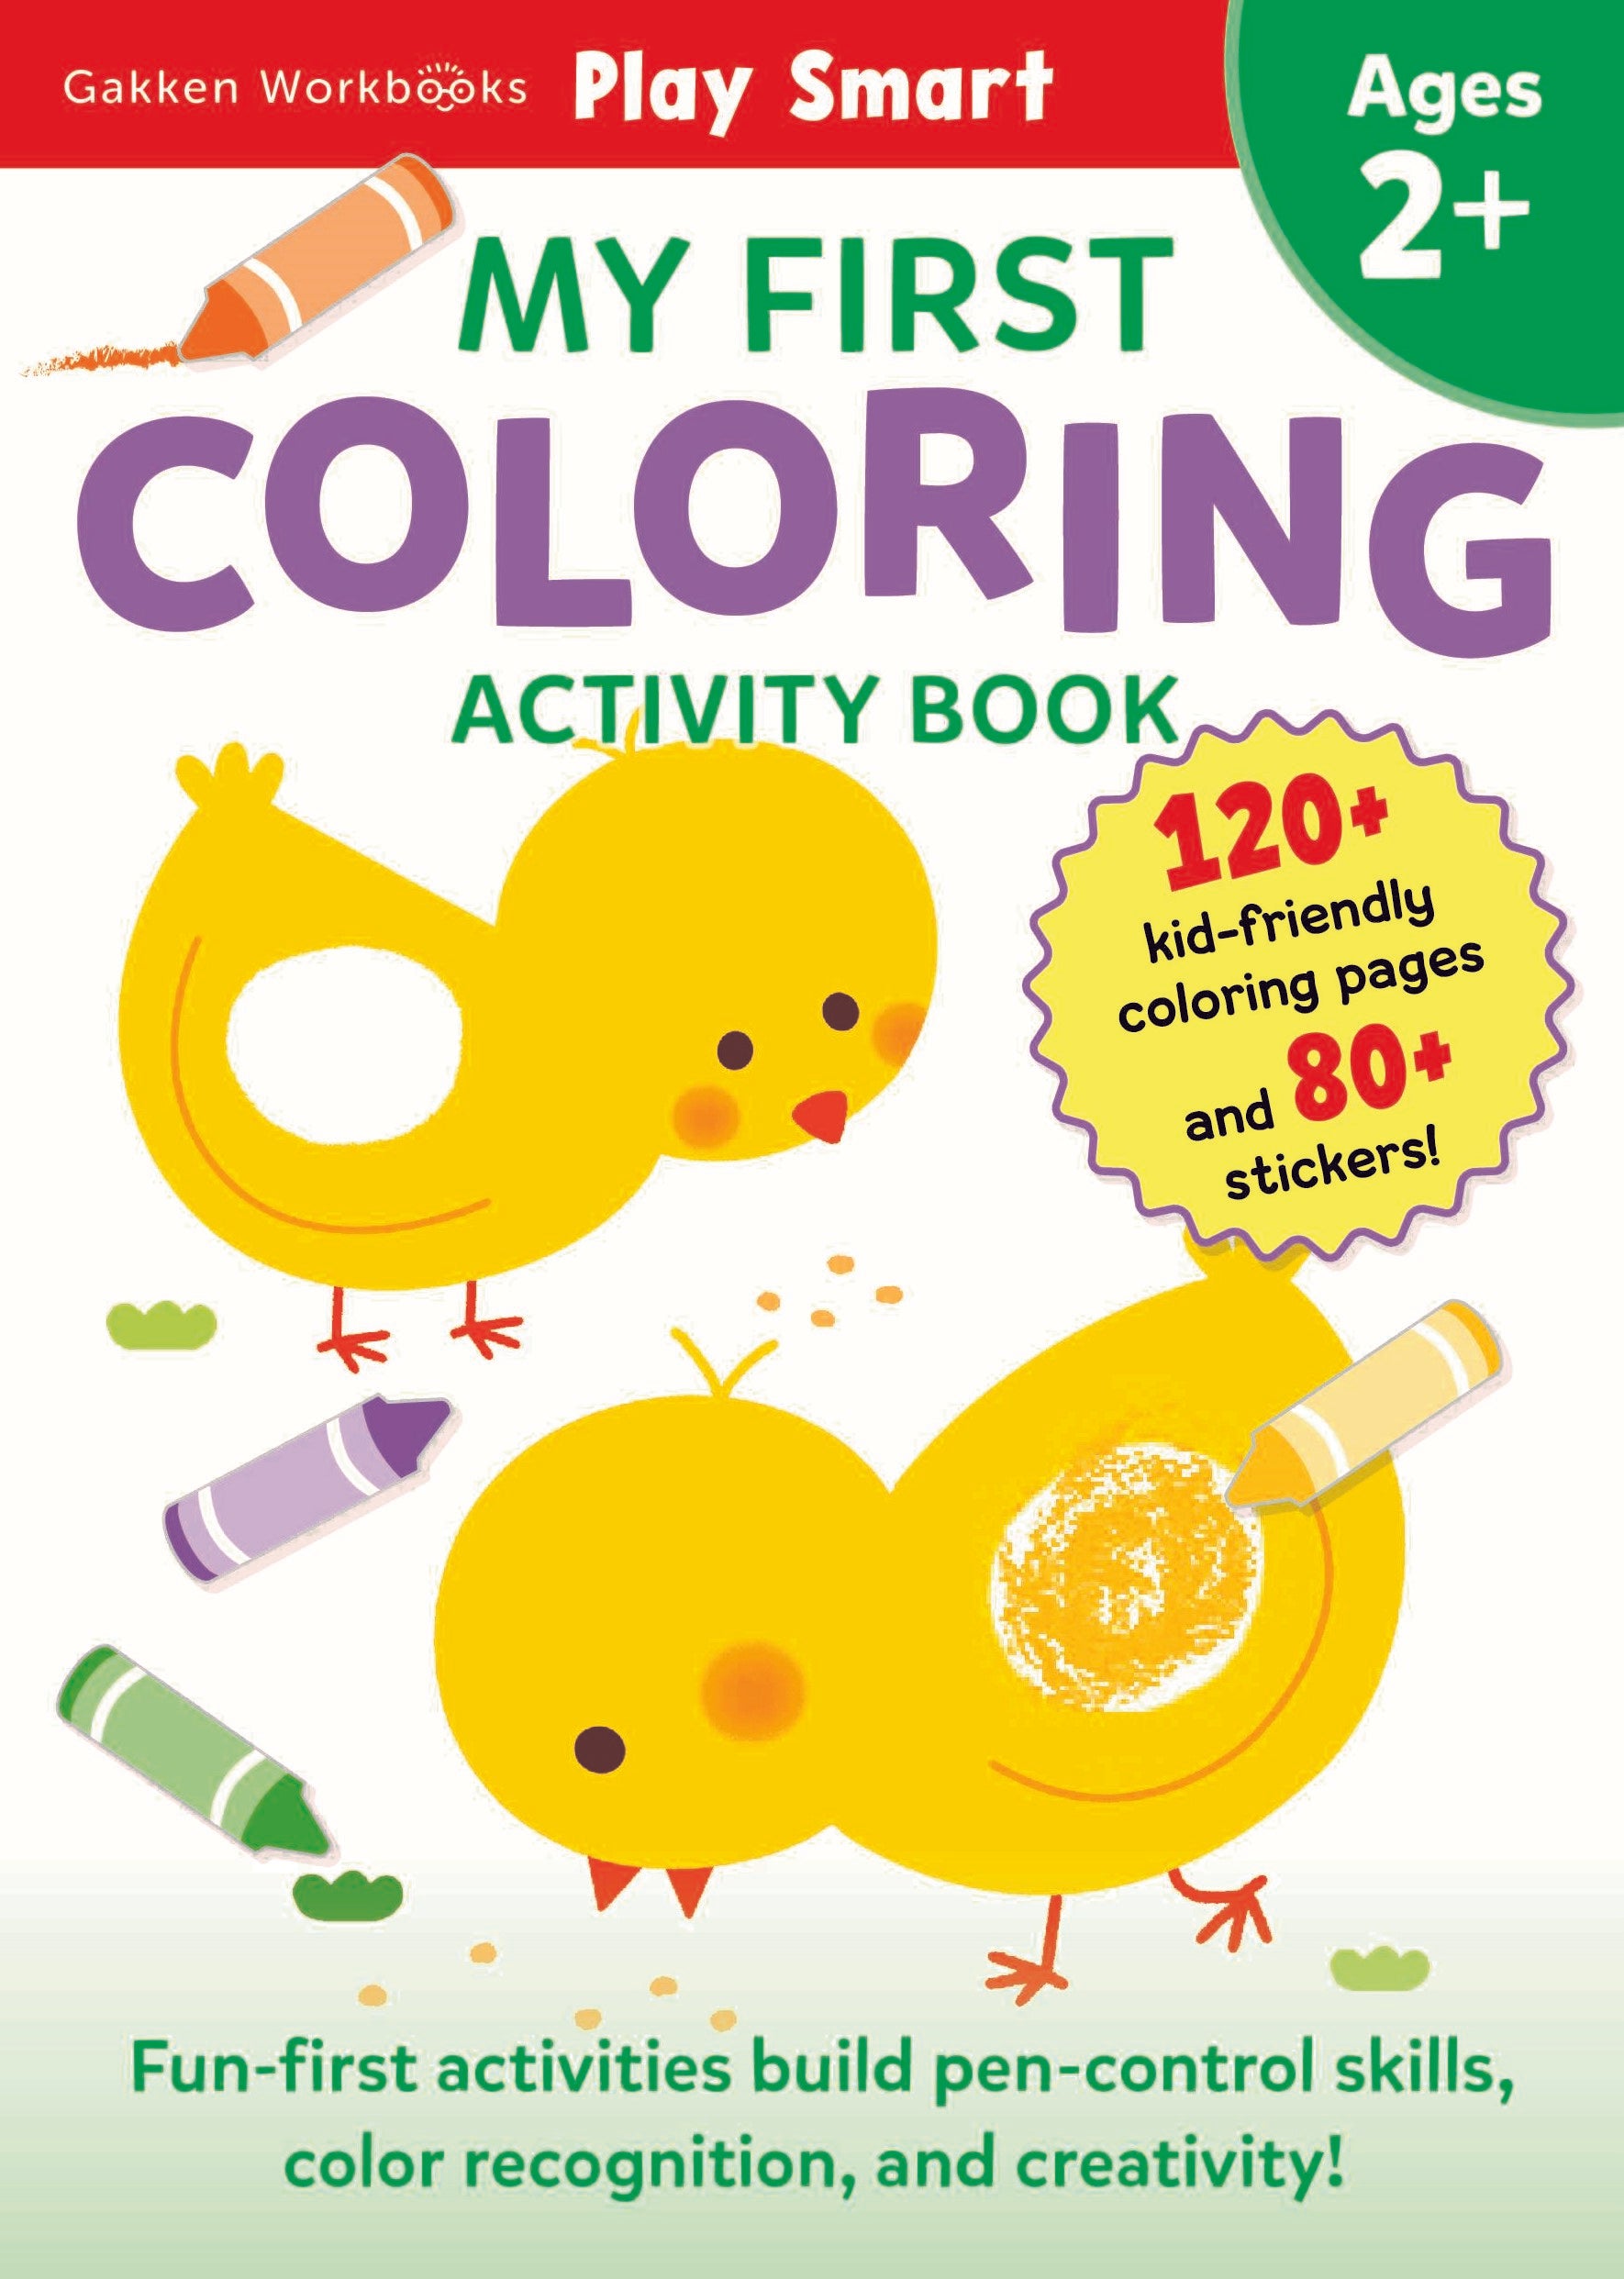 PLAY SMART My First Coloring Activity Book 2+ - _MS, assessment, EDUCATIONAL PUBLISHING HOUSE, PLAYSMART, PRESCHOOL